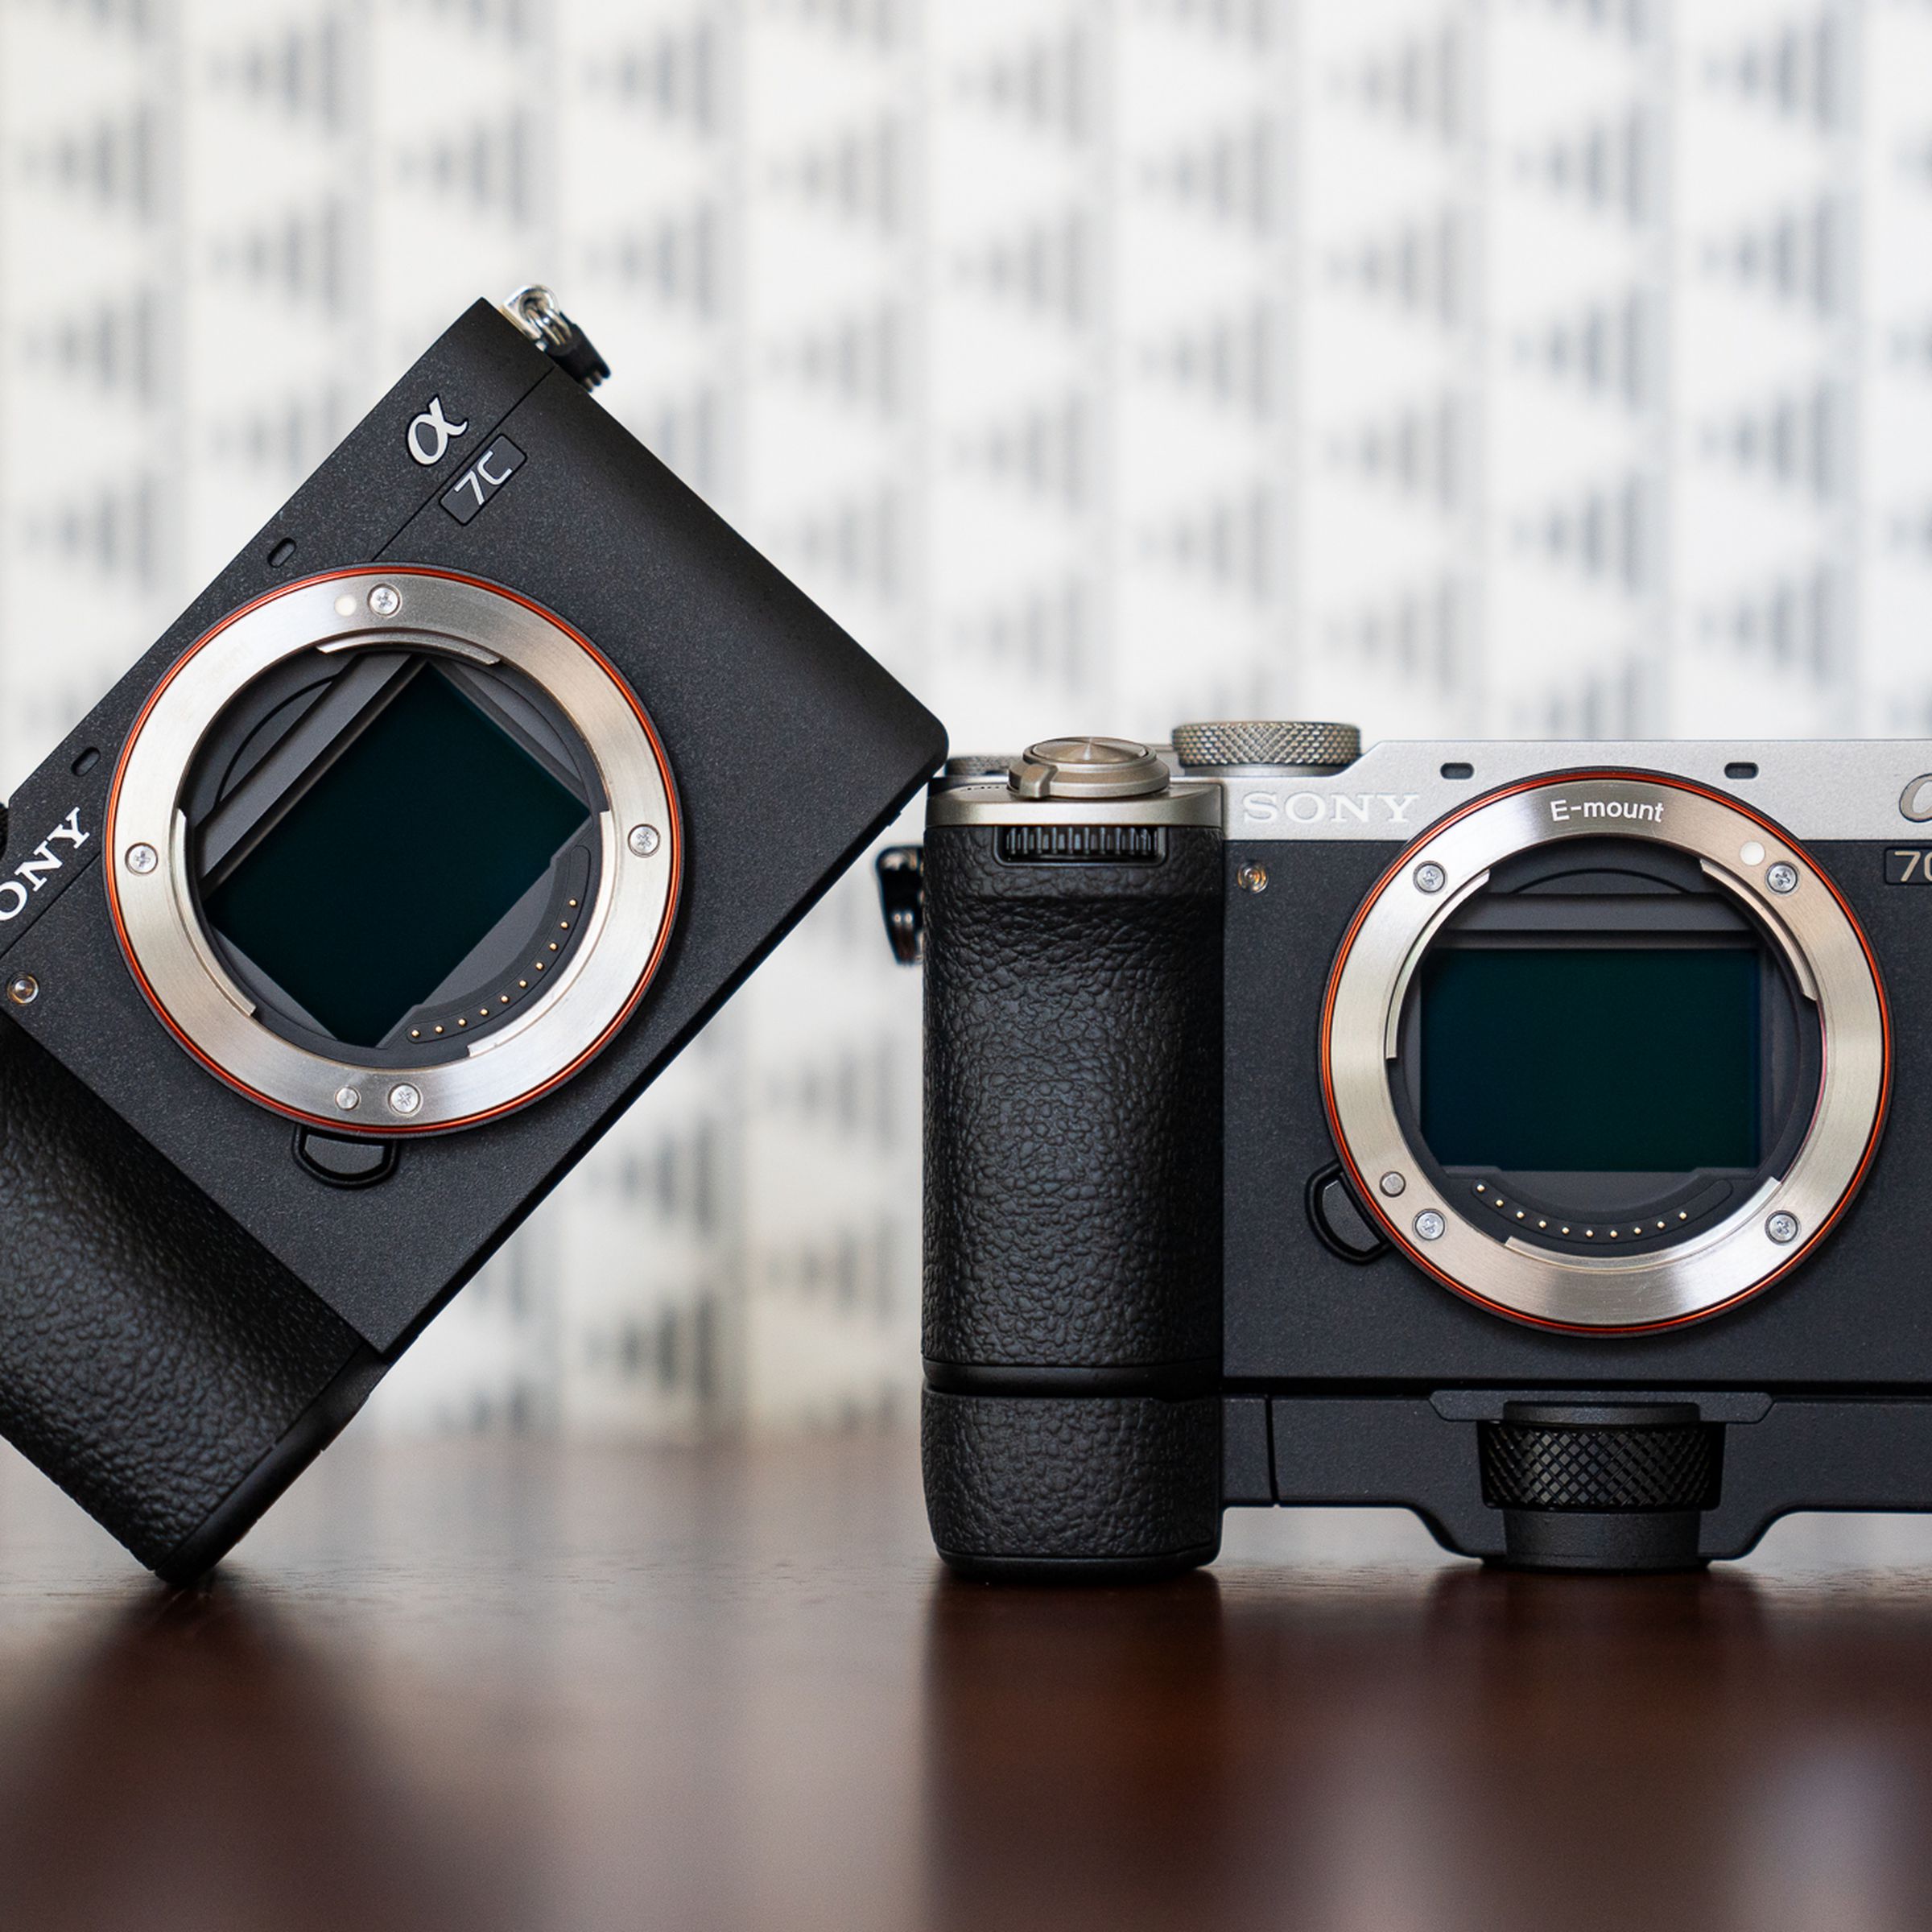 The Sony A7C II and A7C R cameras, sitting on a wood surface without lenses attached. The A7C II in black is angled and resting one side on the silver / black A7C R, which is mounted to its own handgrip.